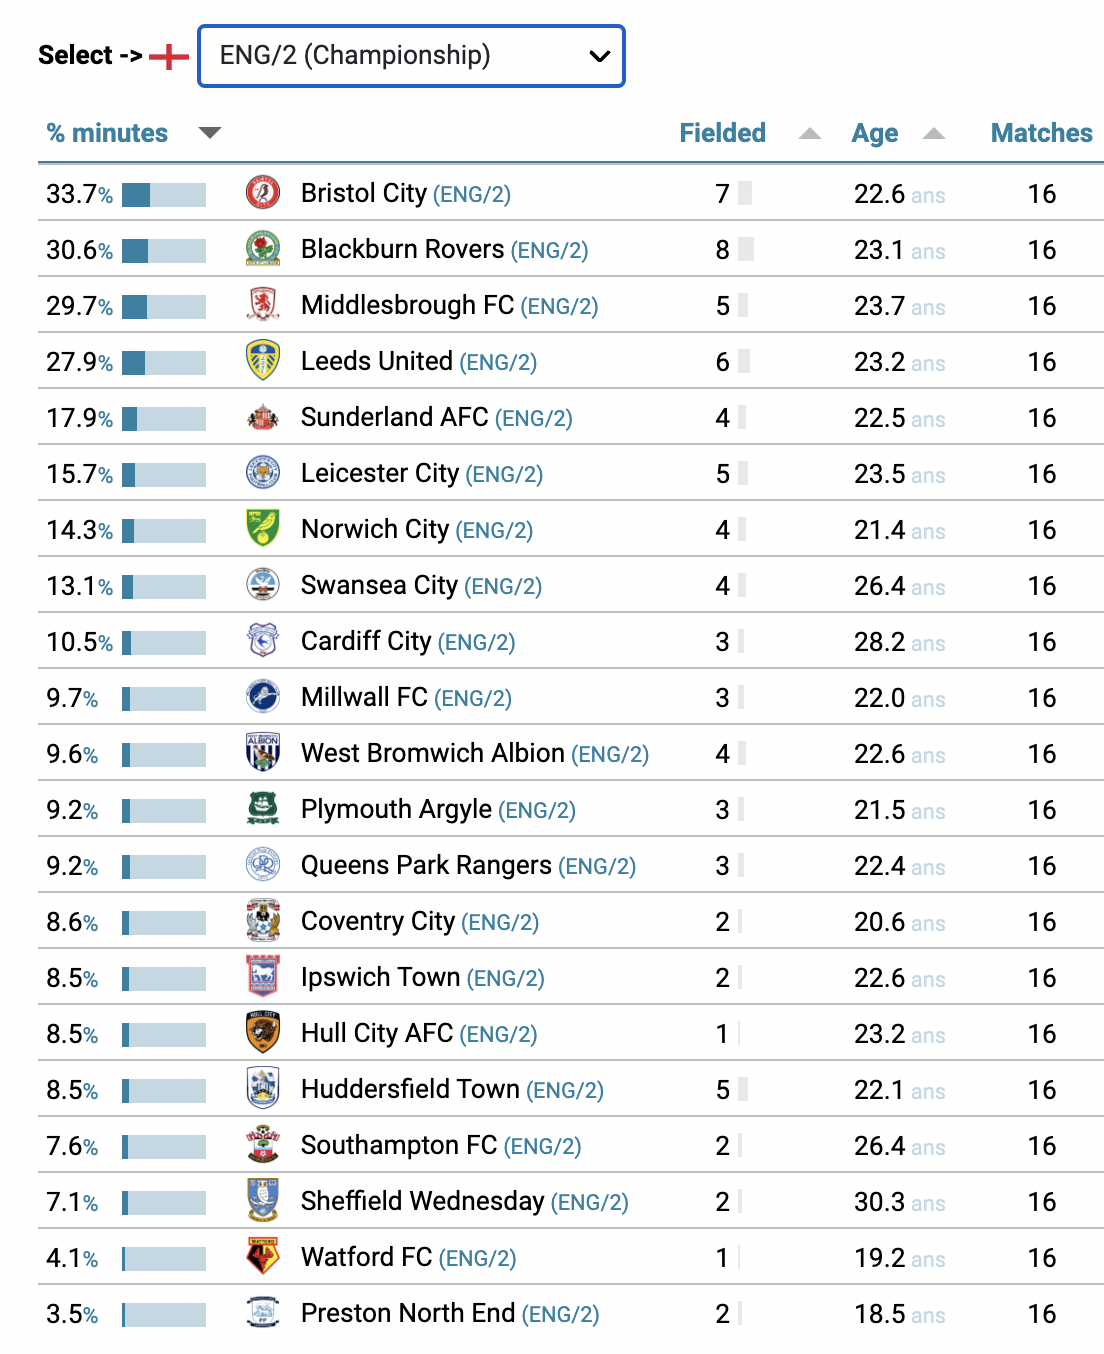 Championship clubs ranked according to club-trained minutes